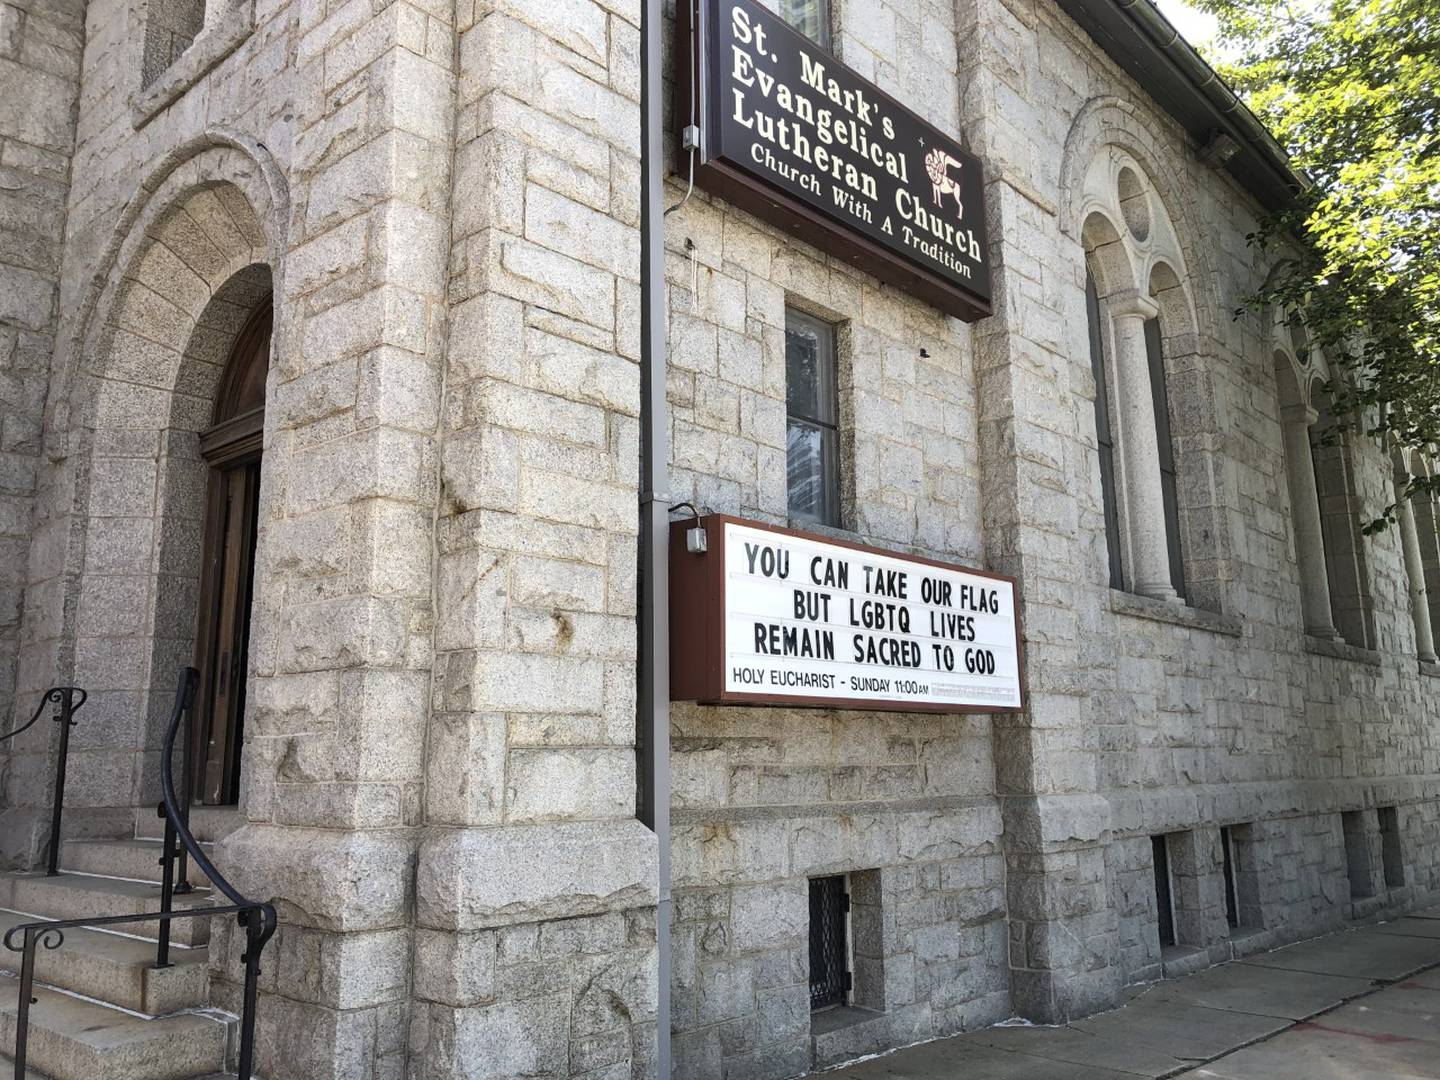 After someone removed the LGBTQ pride flag from the church, the congregation changed the message on the signboard.